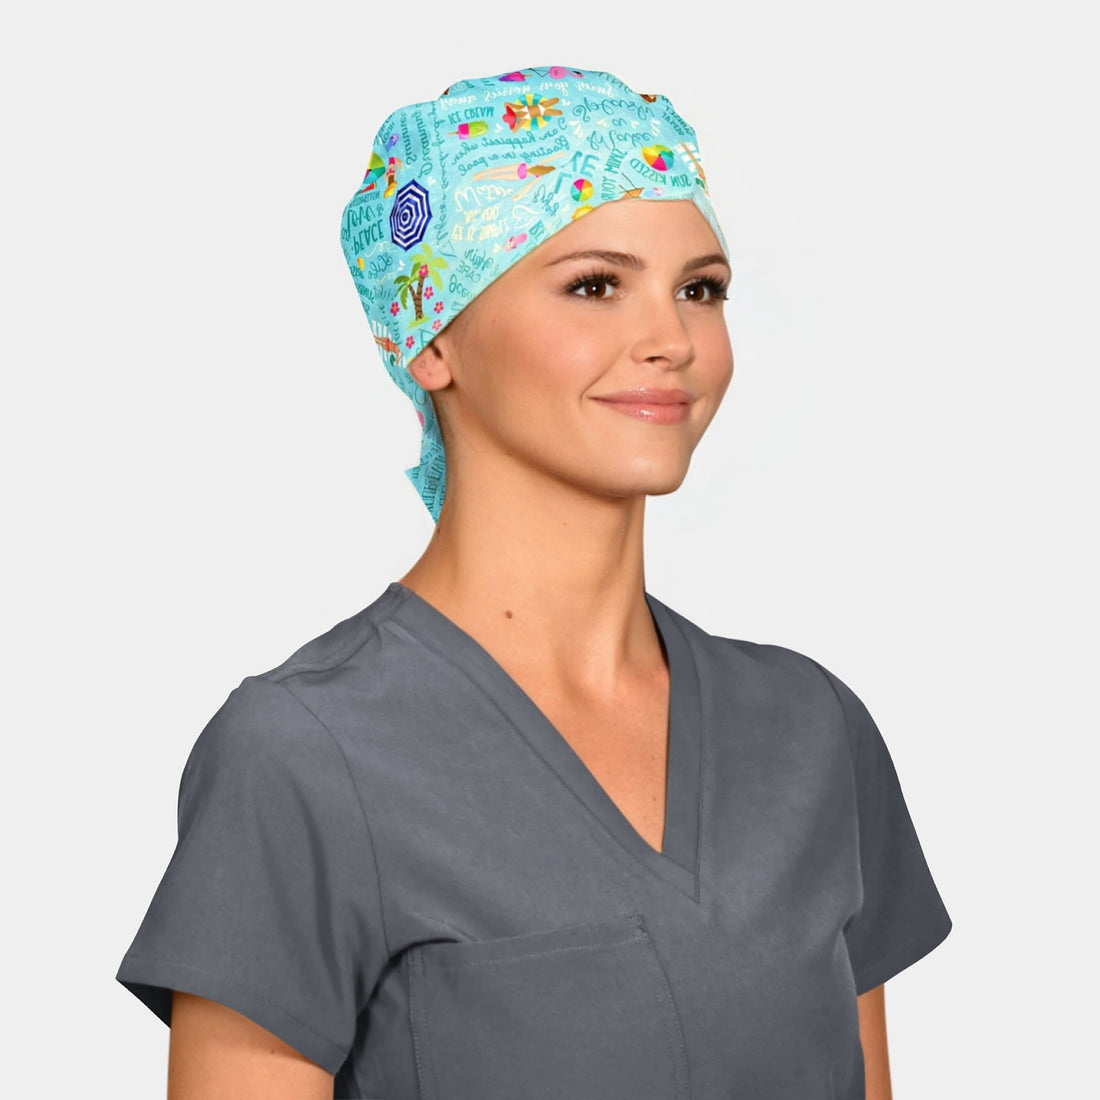 Dreaming of Summer- Pixie Surgical Scrub Hats